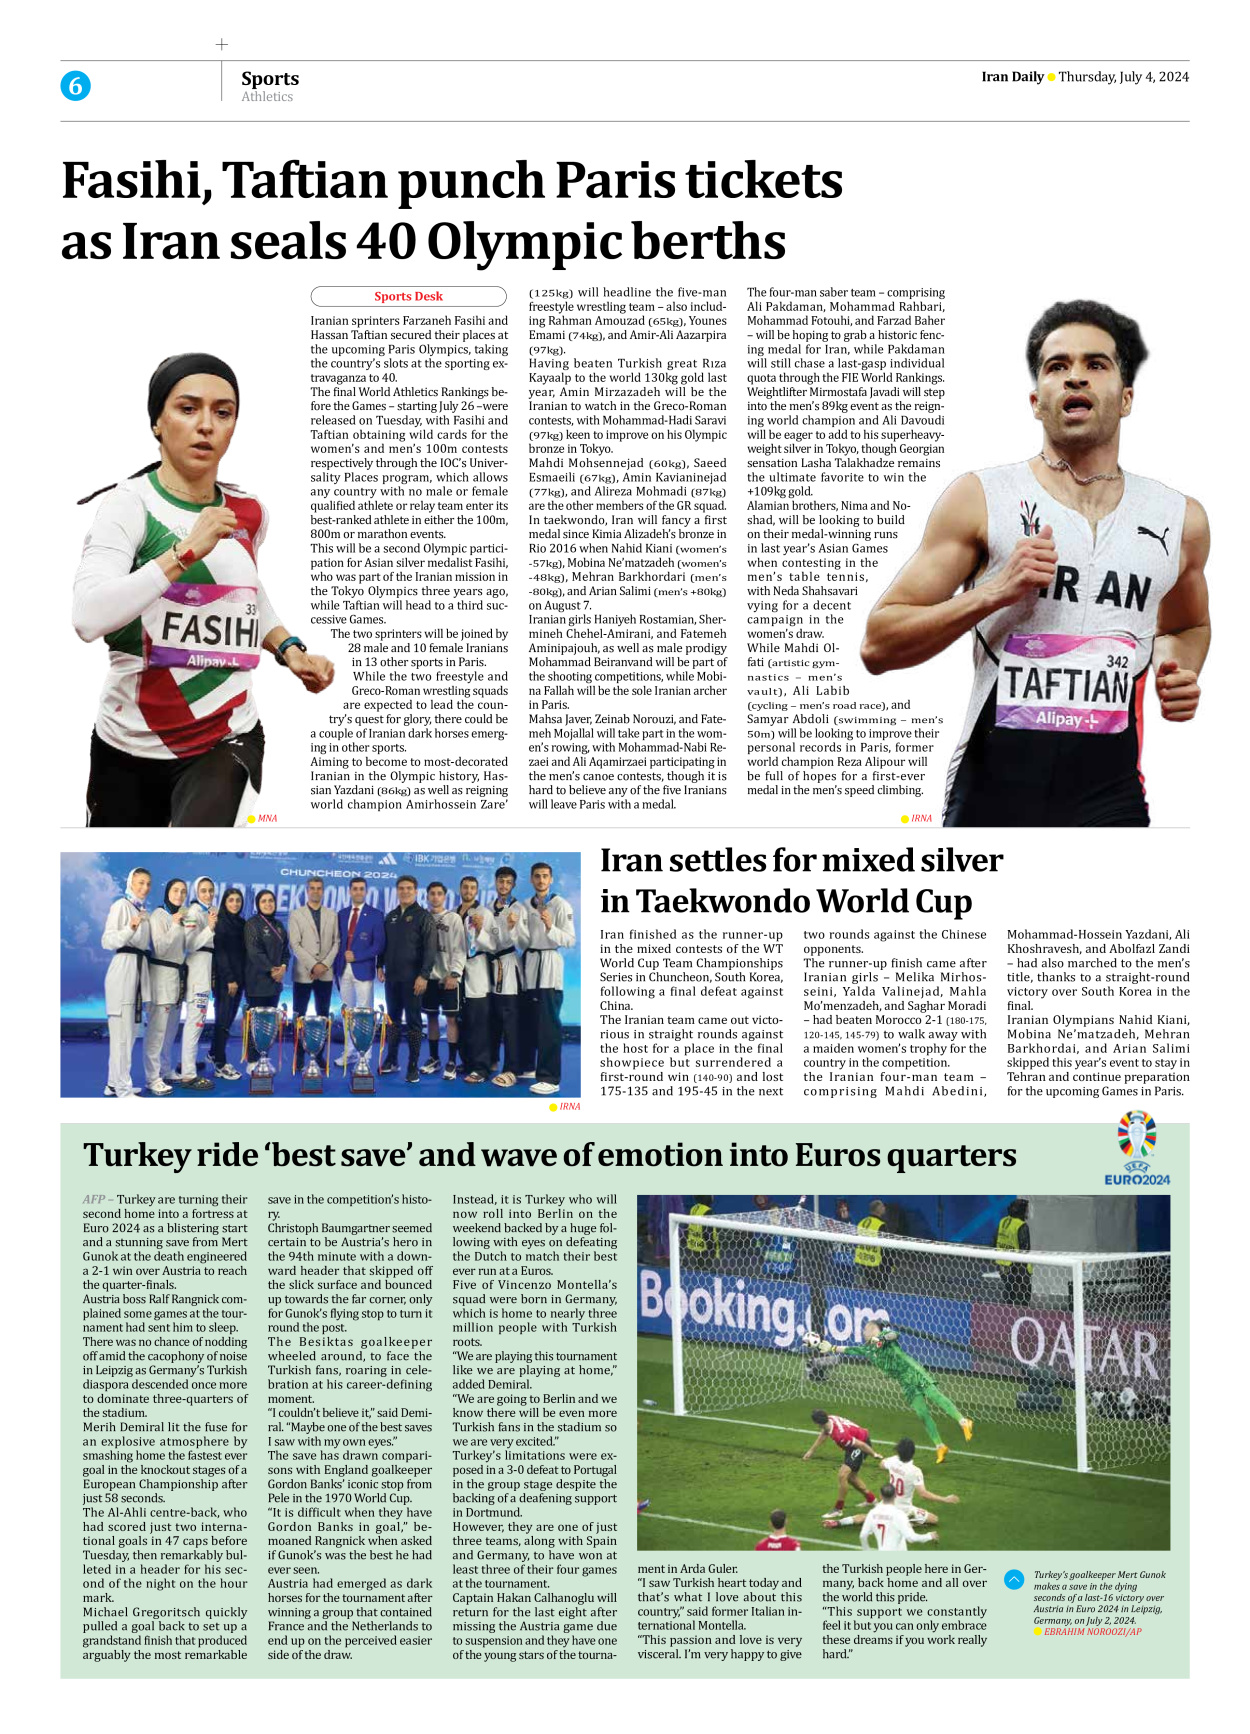 Iran Daily - Number Seven Thousand Five Hundred and Ninety Six - 04 July 2024 - Page 6